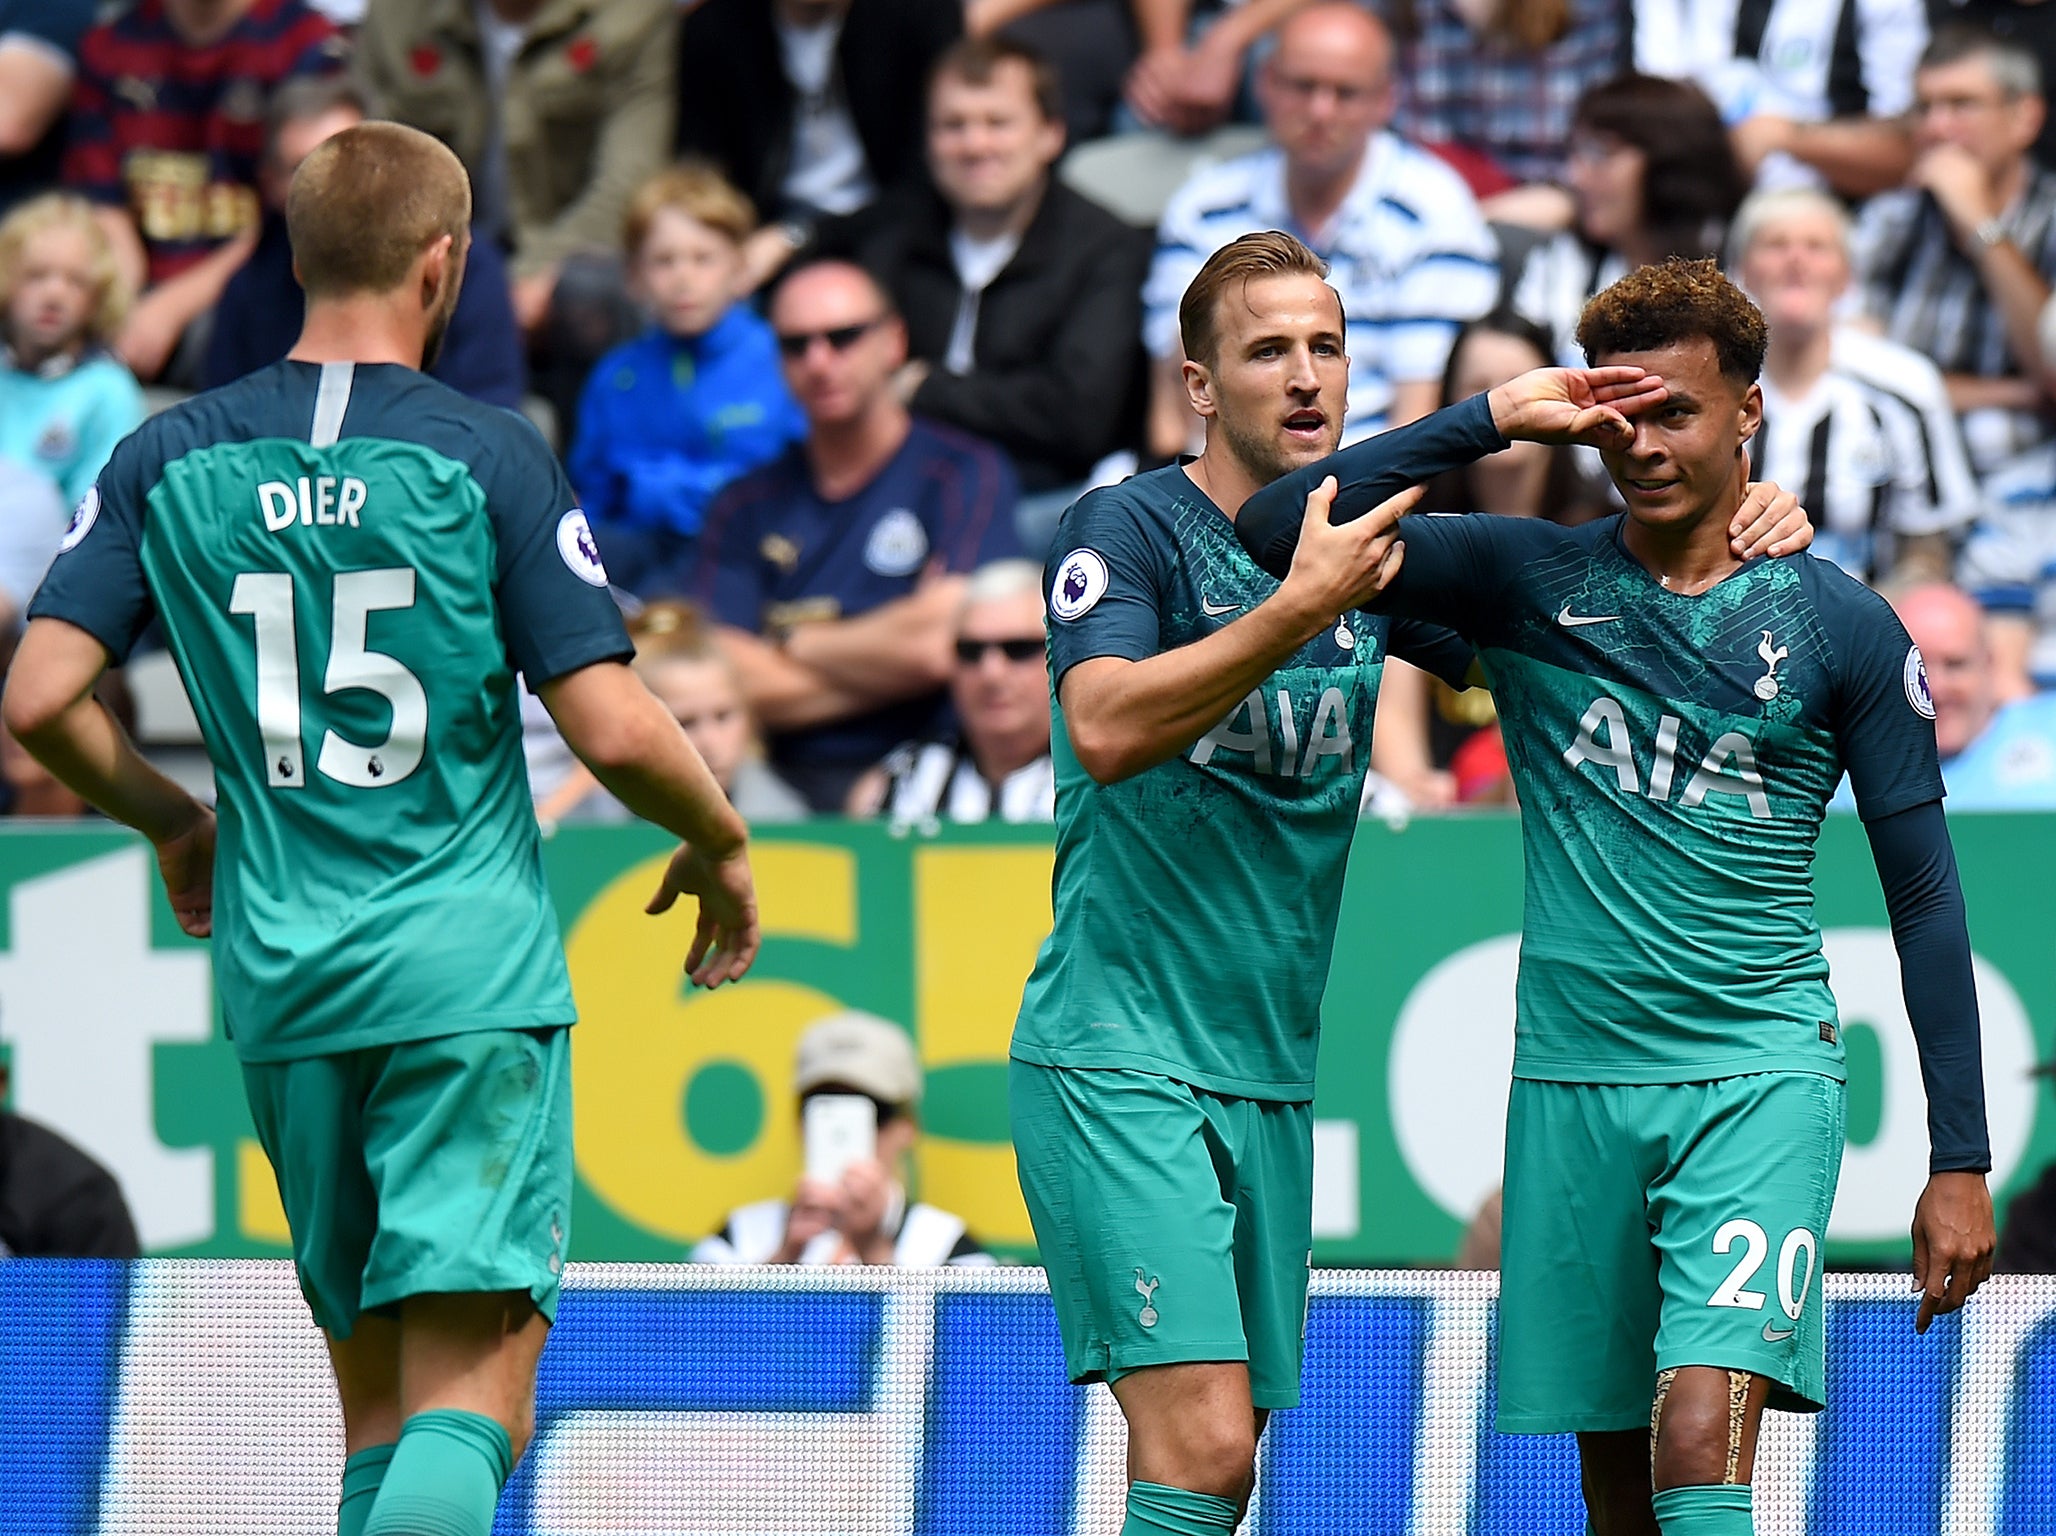 Tottenham Hotspur open their Premier League campaign with a win at Newcastle for second year in a row